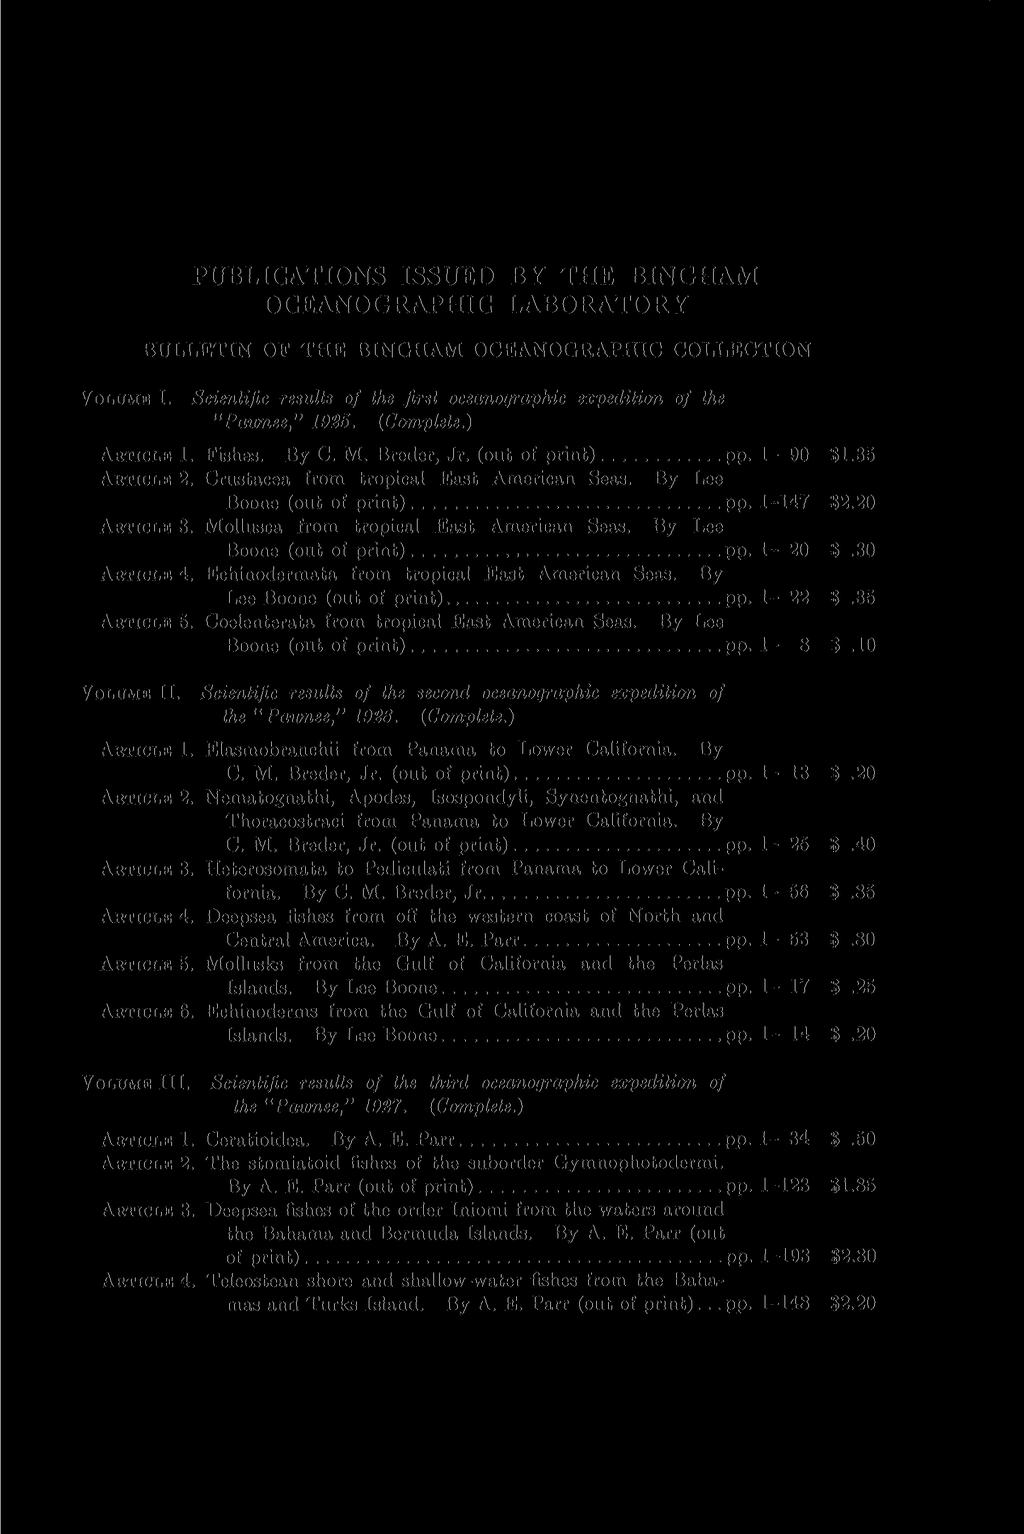 PUBLICATIONS ISSUED BY THE BINGHAM OCEANOGRAPHIC LABORATORY BULLETIN OF THE BINGHAM OCEANOGRAPHIC COLLECTION VOLUME I. Scientific results of the first oceanographic expedition of the "Pawnee," 1925.